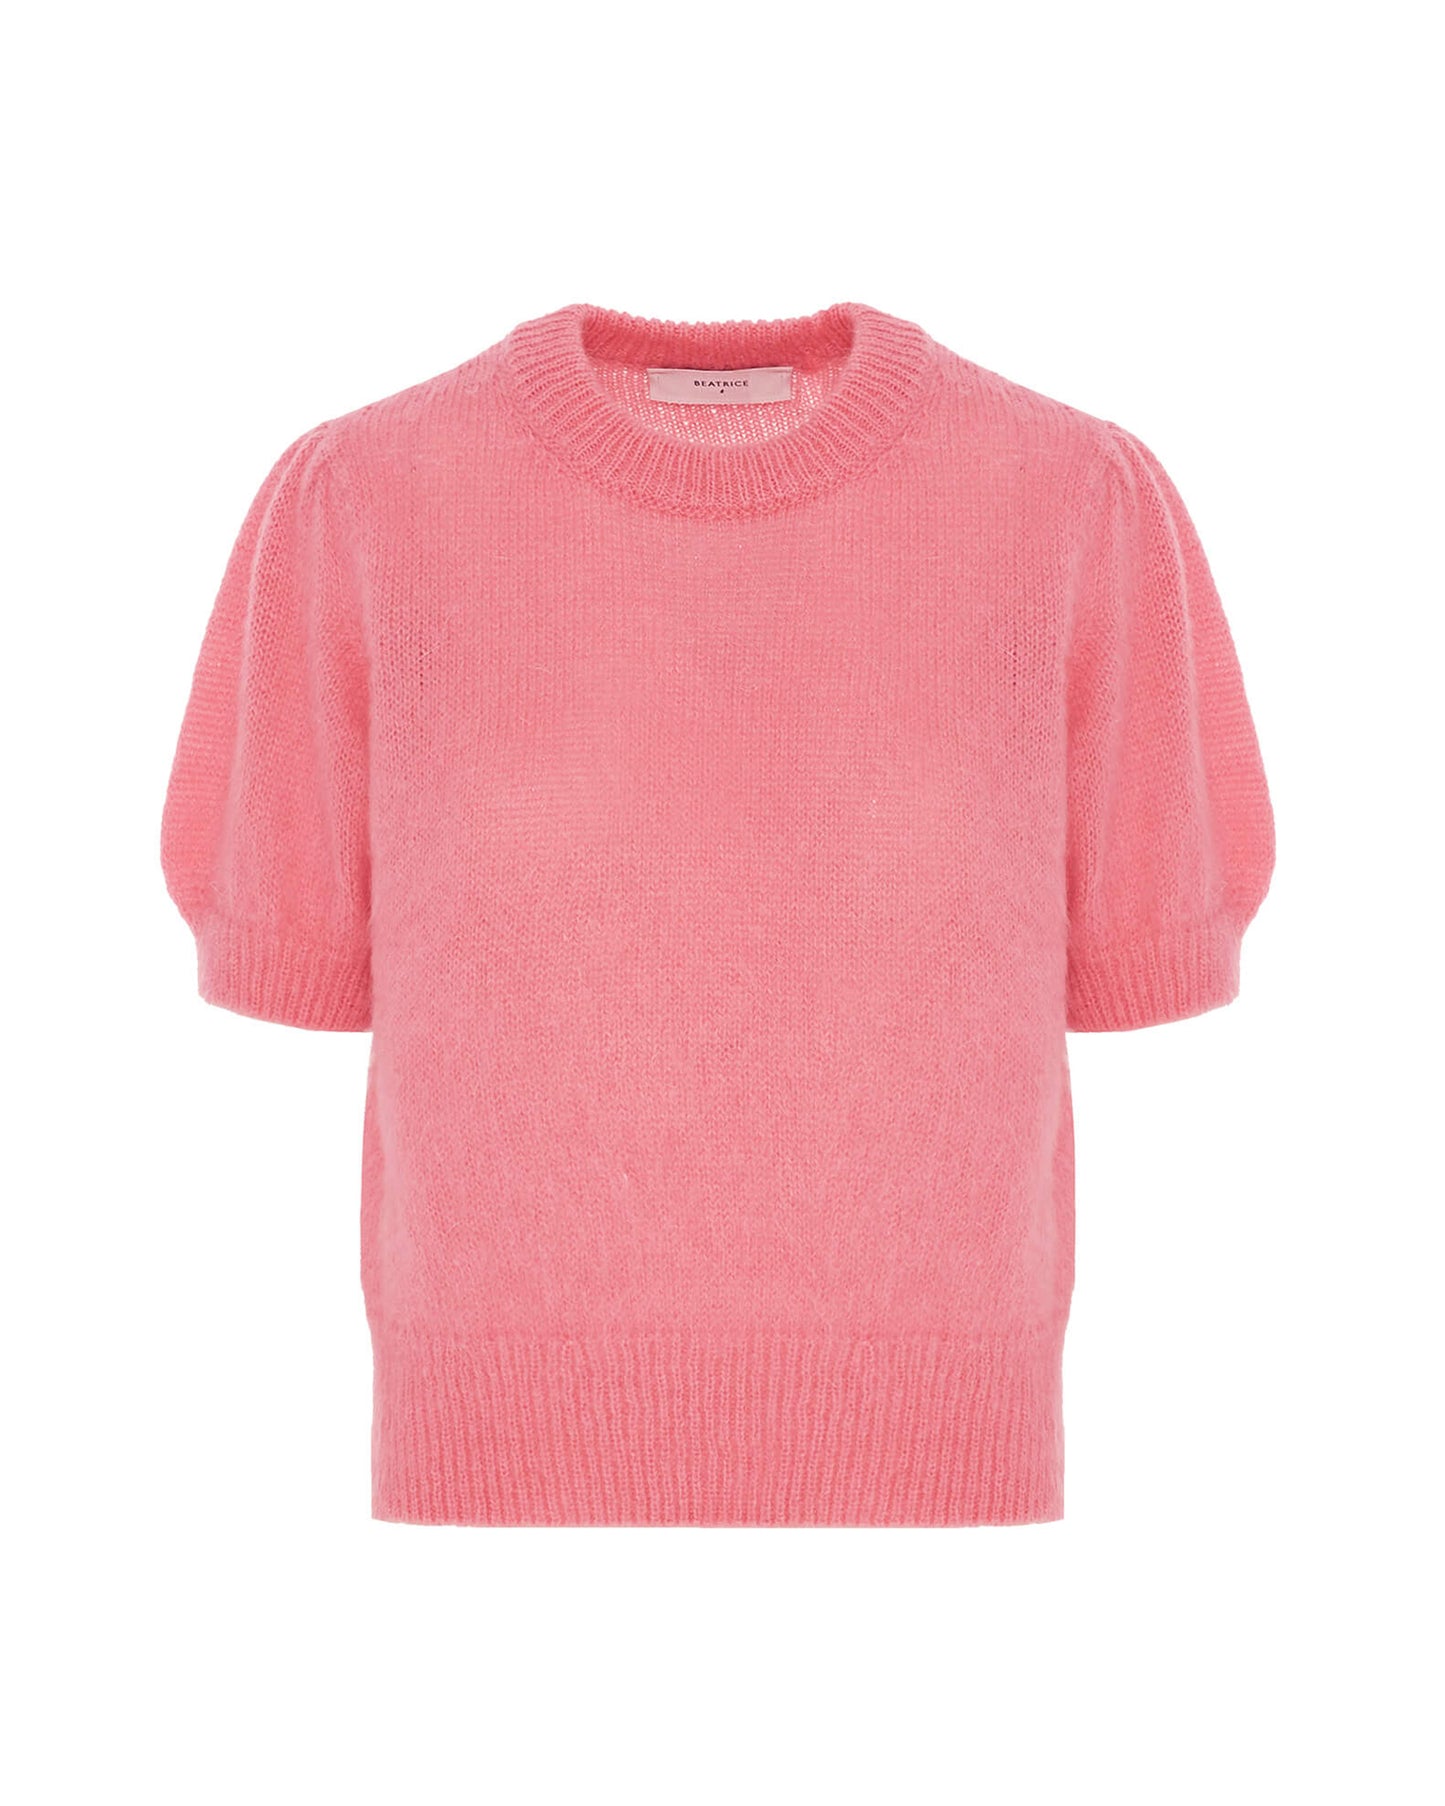 BEATRICE.B Puff Sleeve Cropped Sweater in Pink